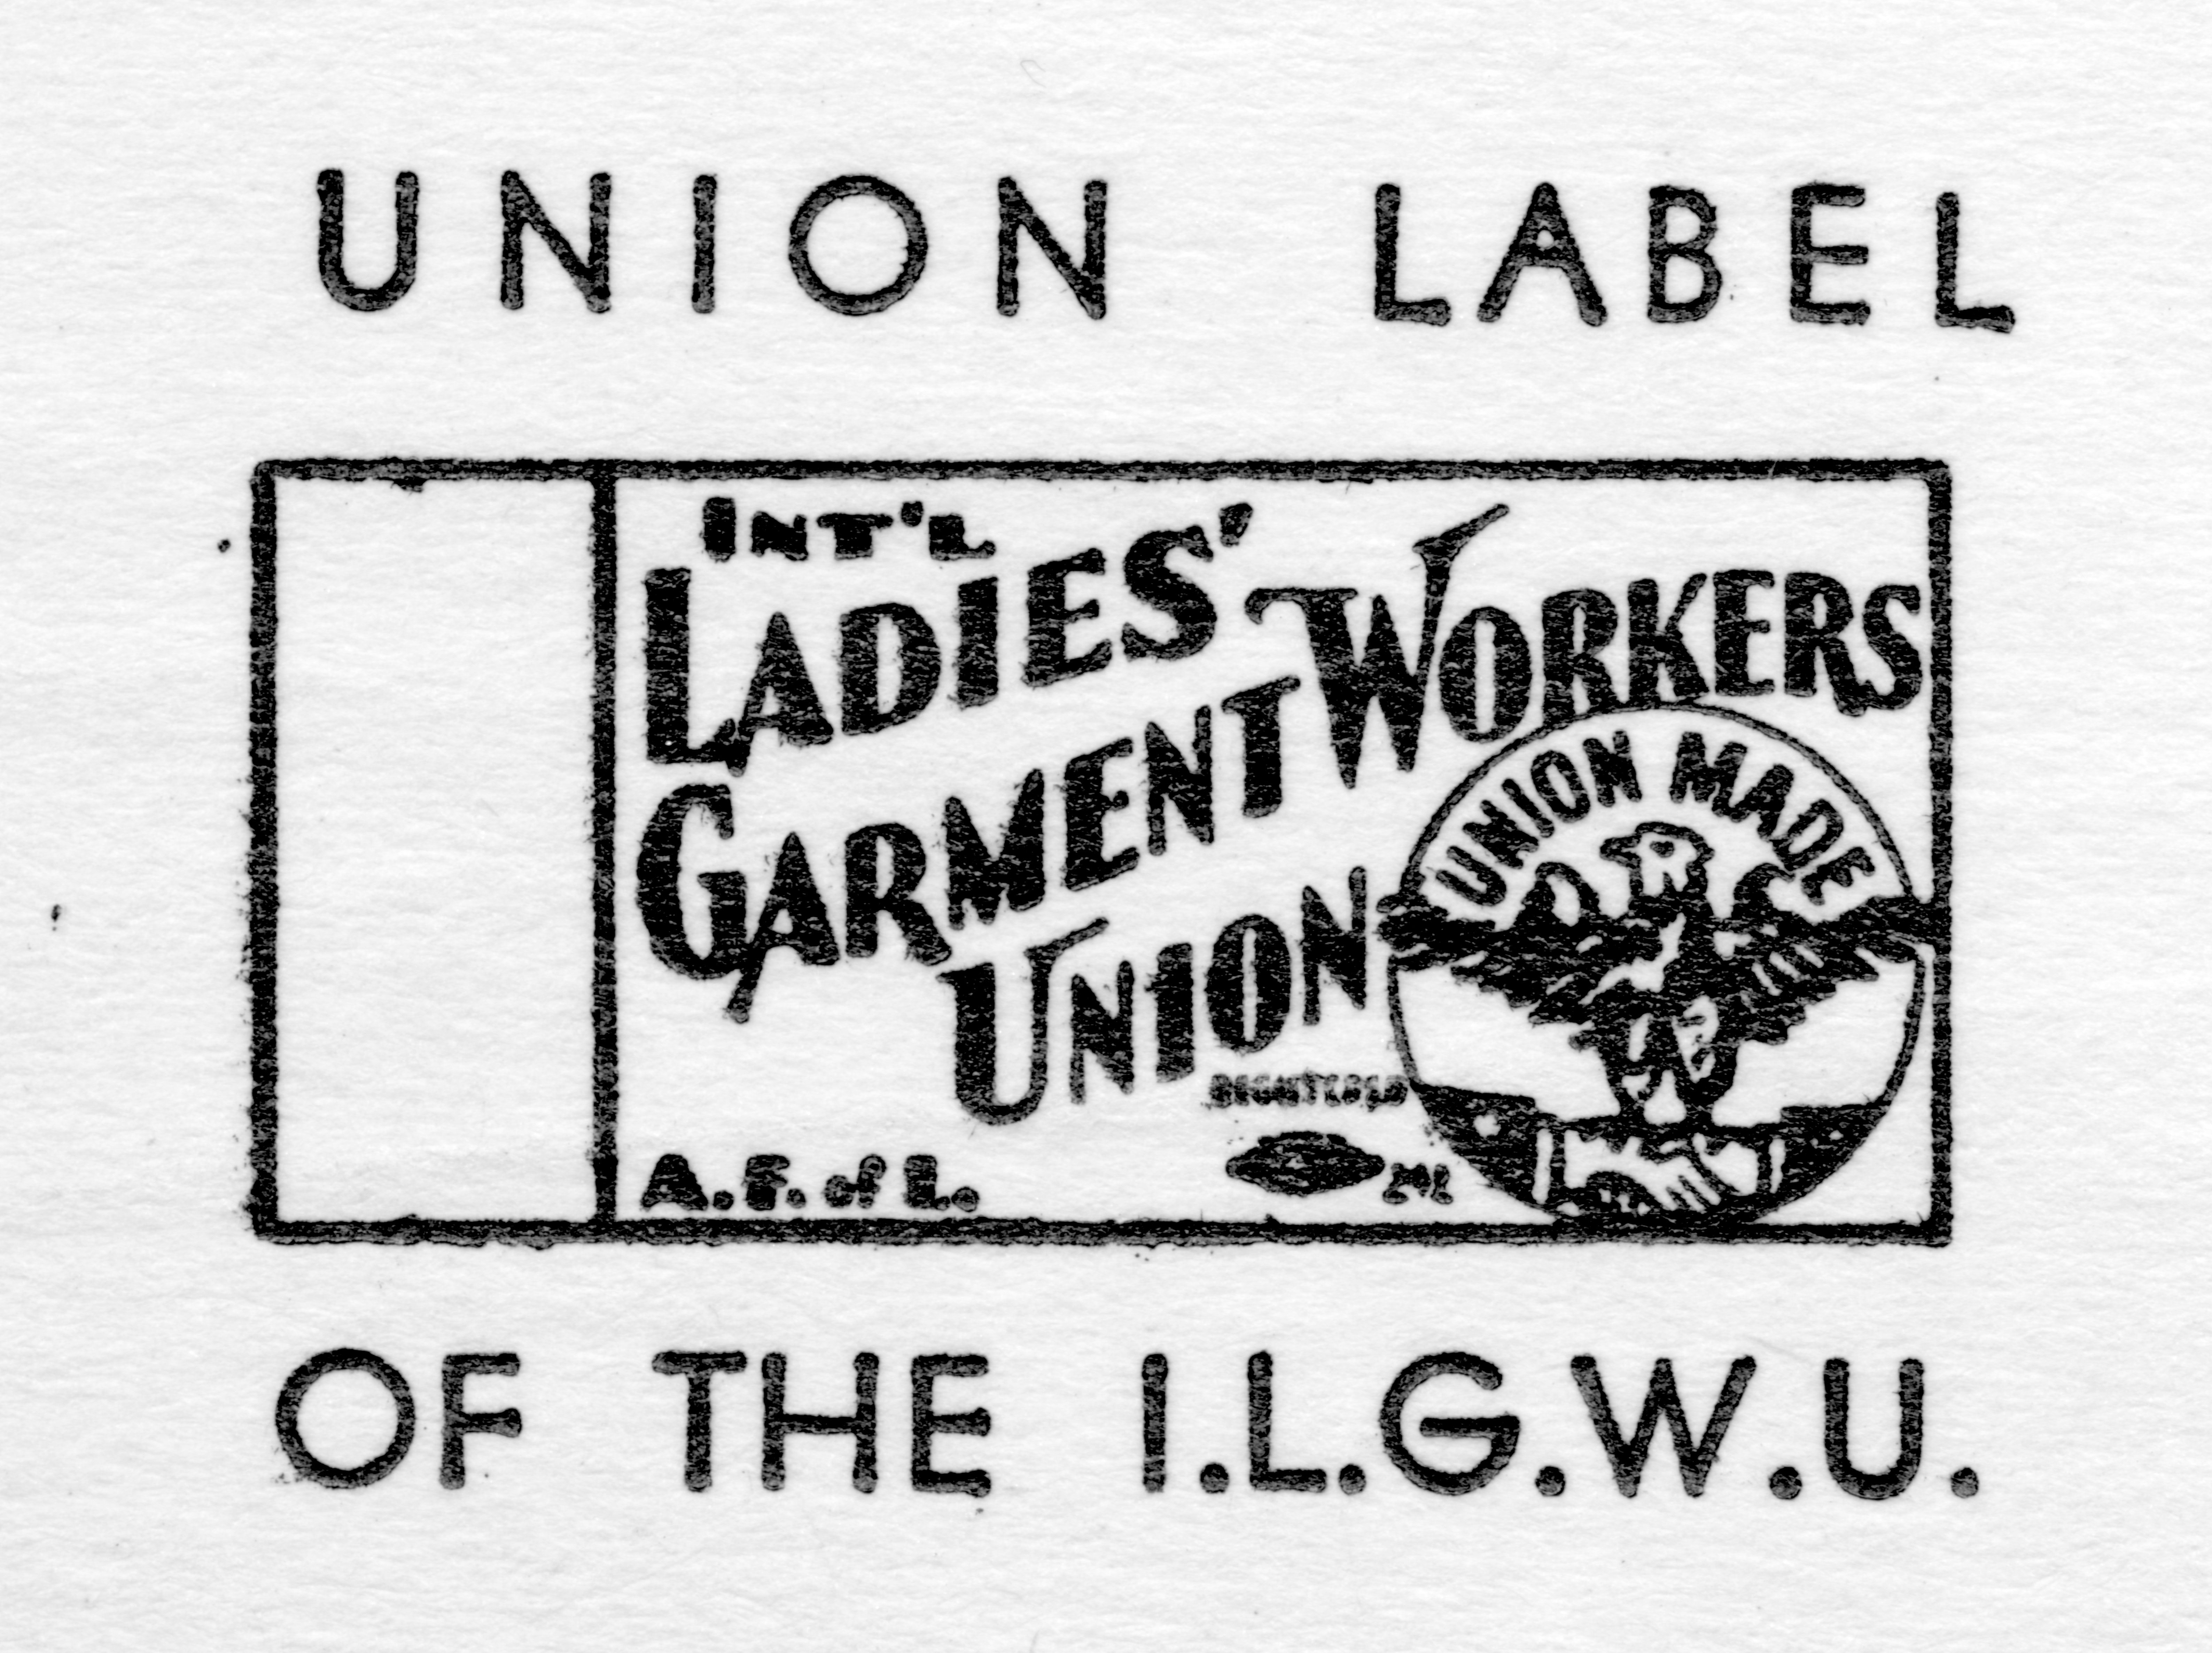 “Look for the Union Label...” When ILGWU founders met on June 3, 1900 and named their union, they immediately adopted a label for it. Early results were encouraging but use remained limited and after 5 years the first label drive ended with only one company in Kalamazoo continuing to use the label. ILGWU called for use of a union label at its first convention. Its use was slow to take hold however, as it was optional and seen as being of limited use. (Cornell University ILR School / Kheel Center ILGWU Collection) 